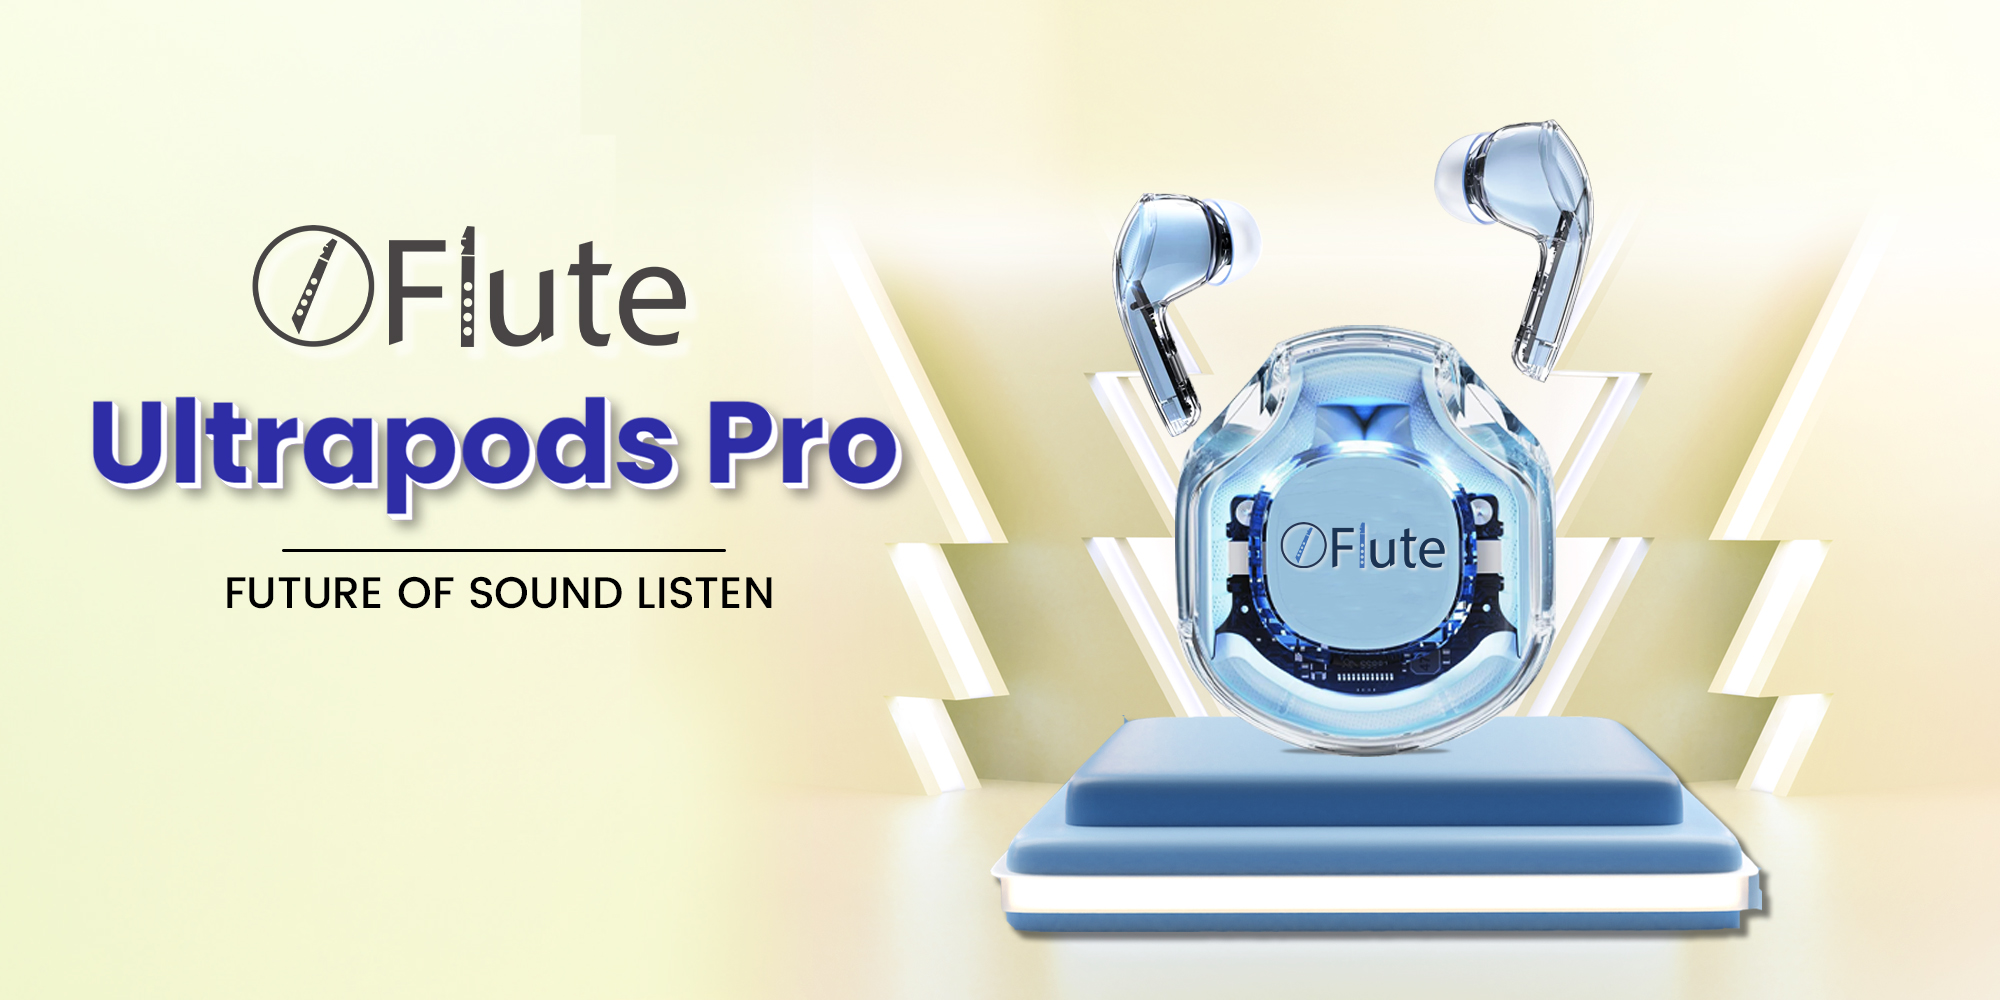 Flute Ultrapods Pro Wireless Earbuds – Mysterious Blue